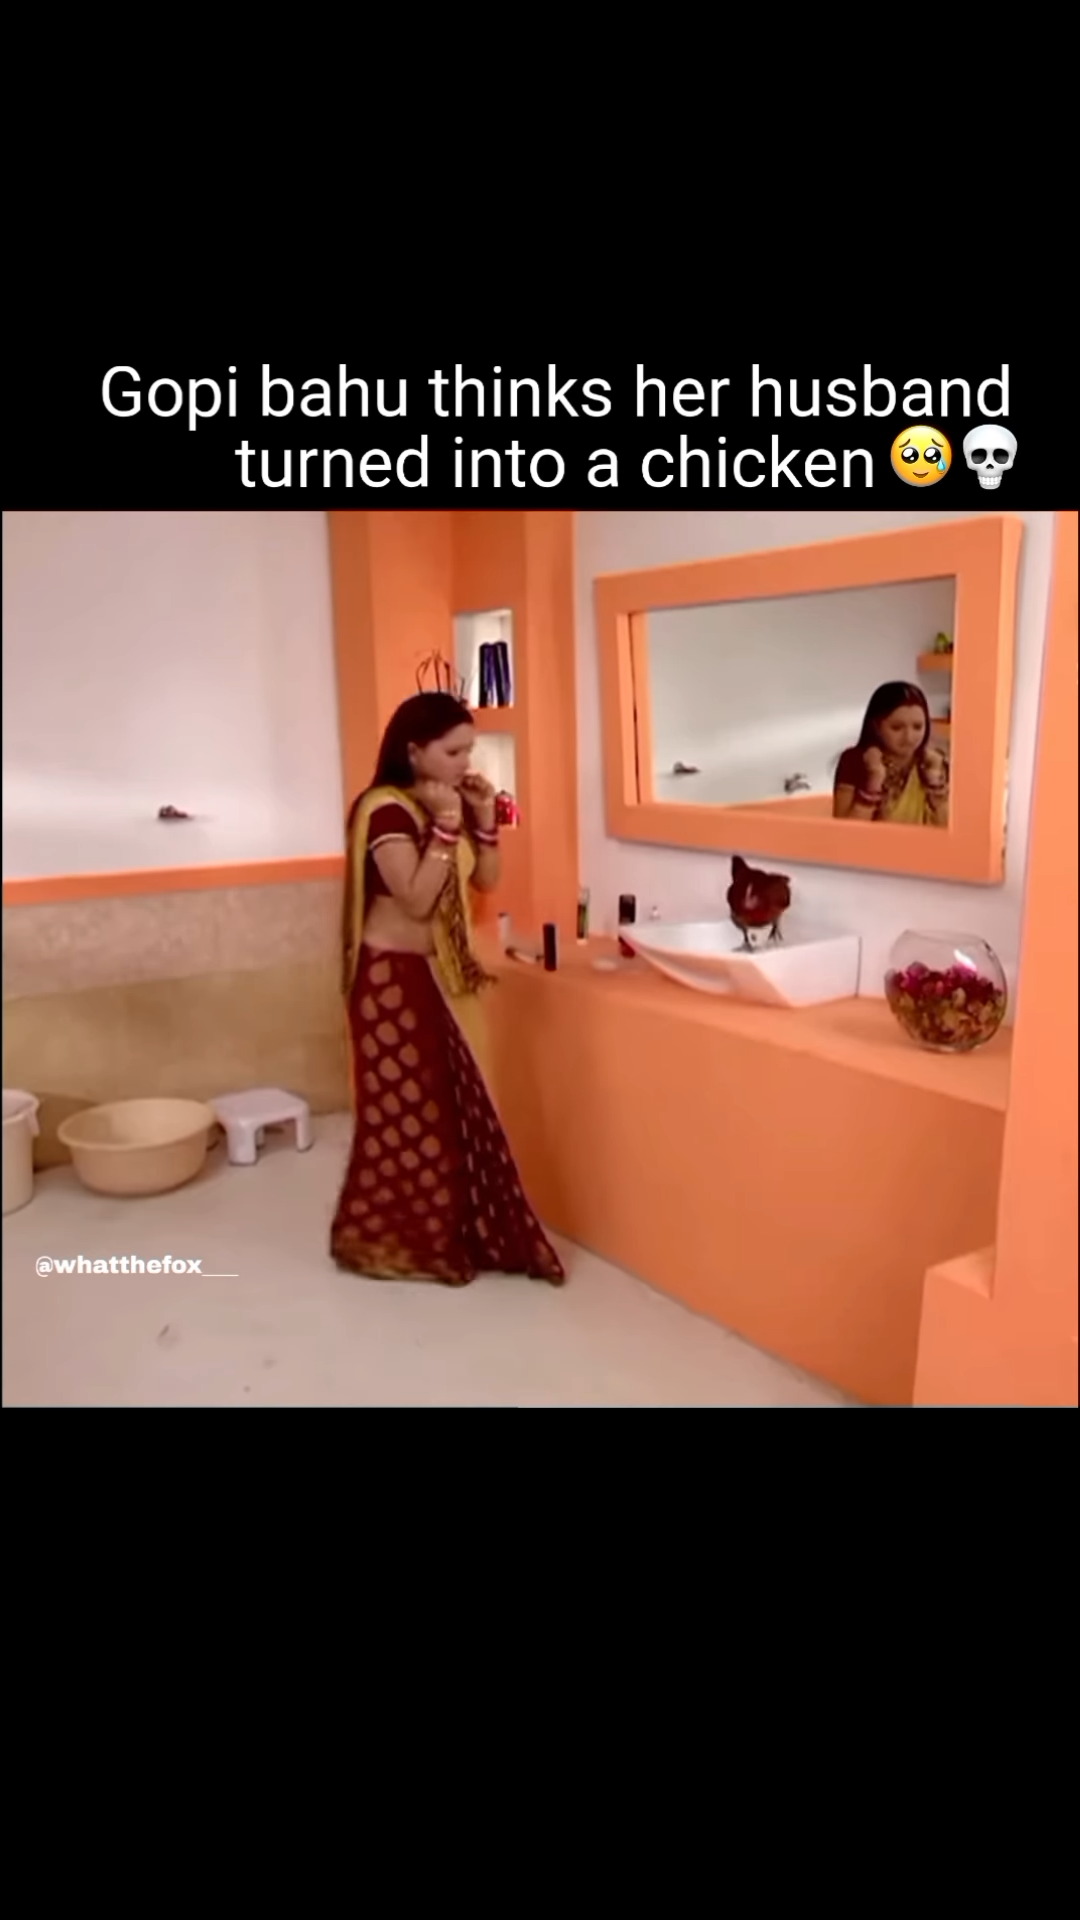 Gopi Bahu talking to a rooster